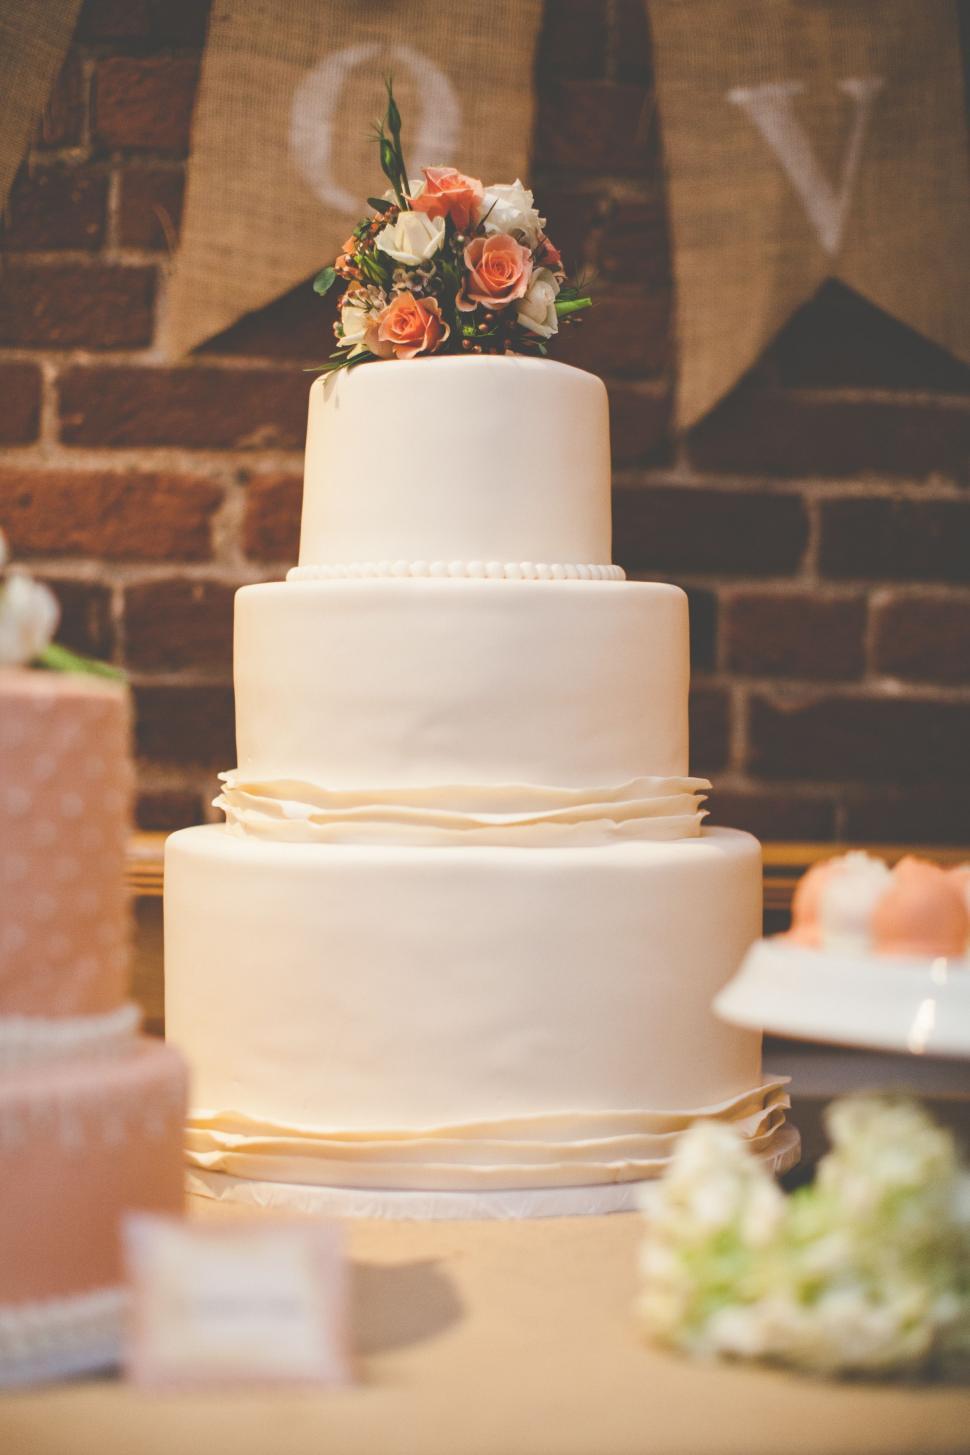 Free Image of Elegant Wedding Cake With Floral Decorations 